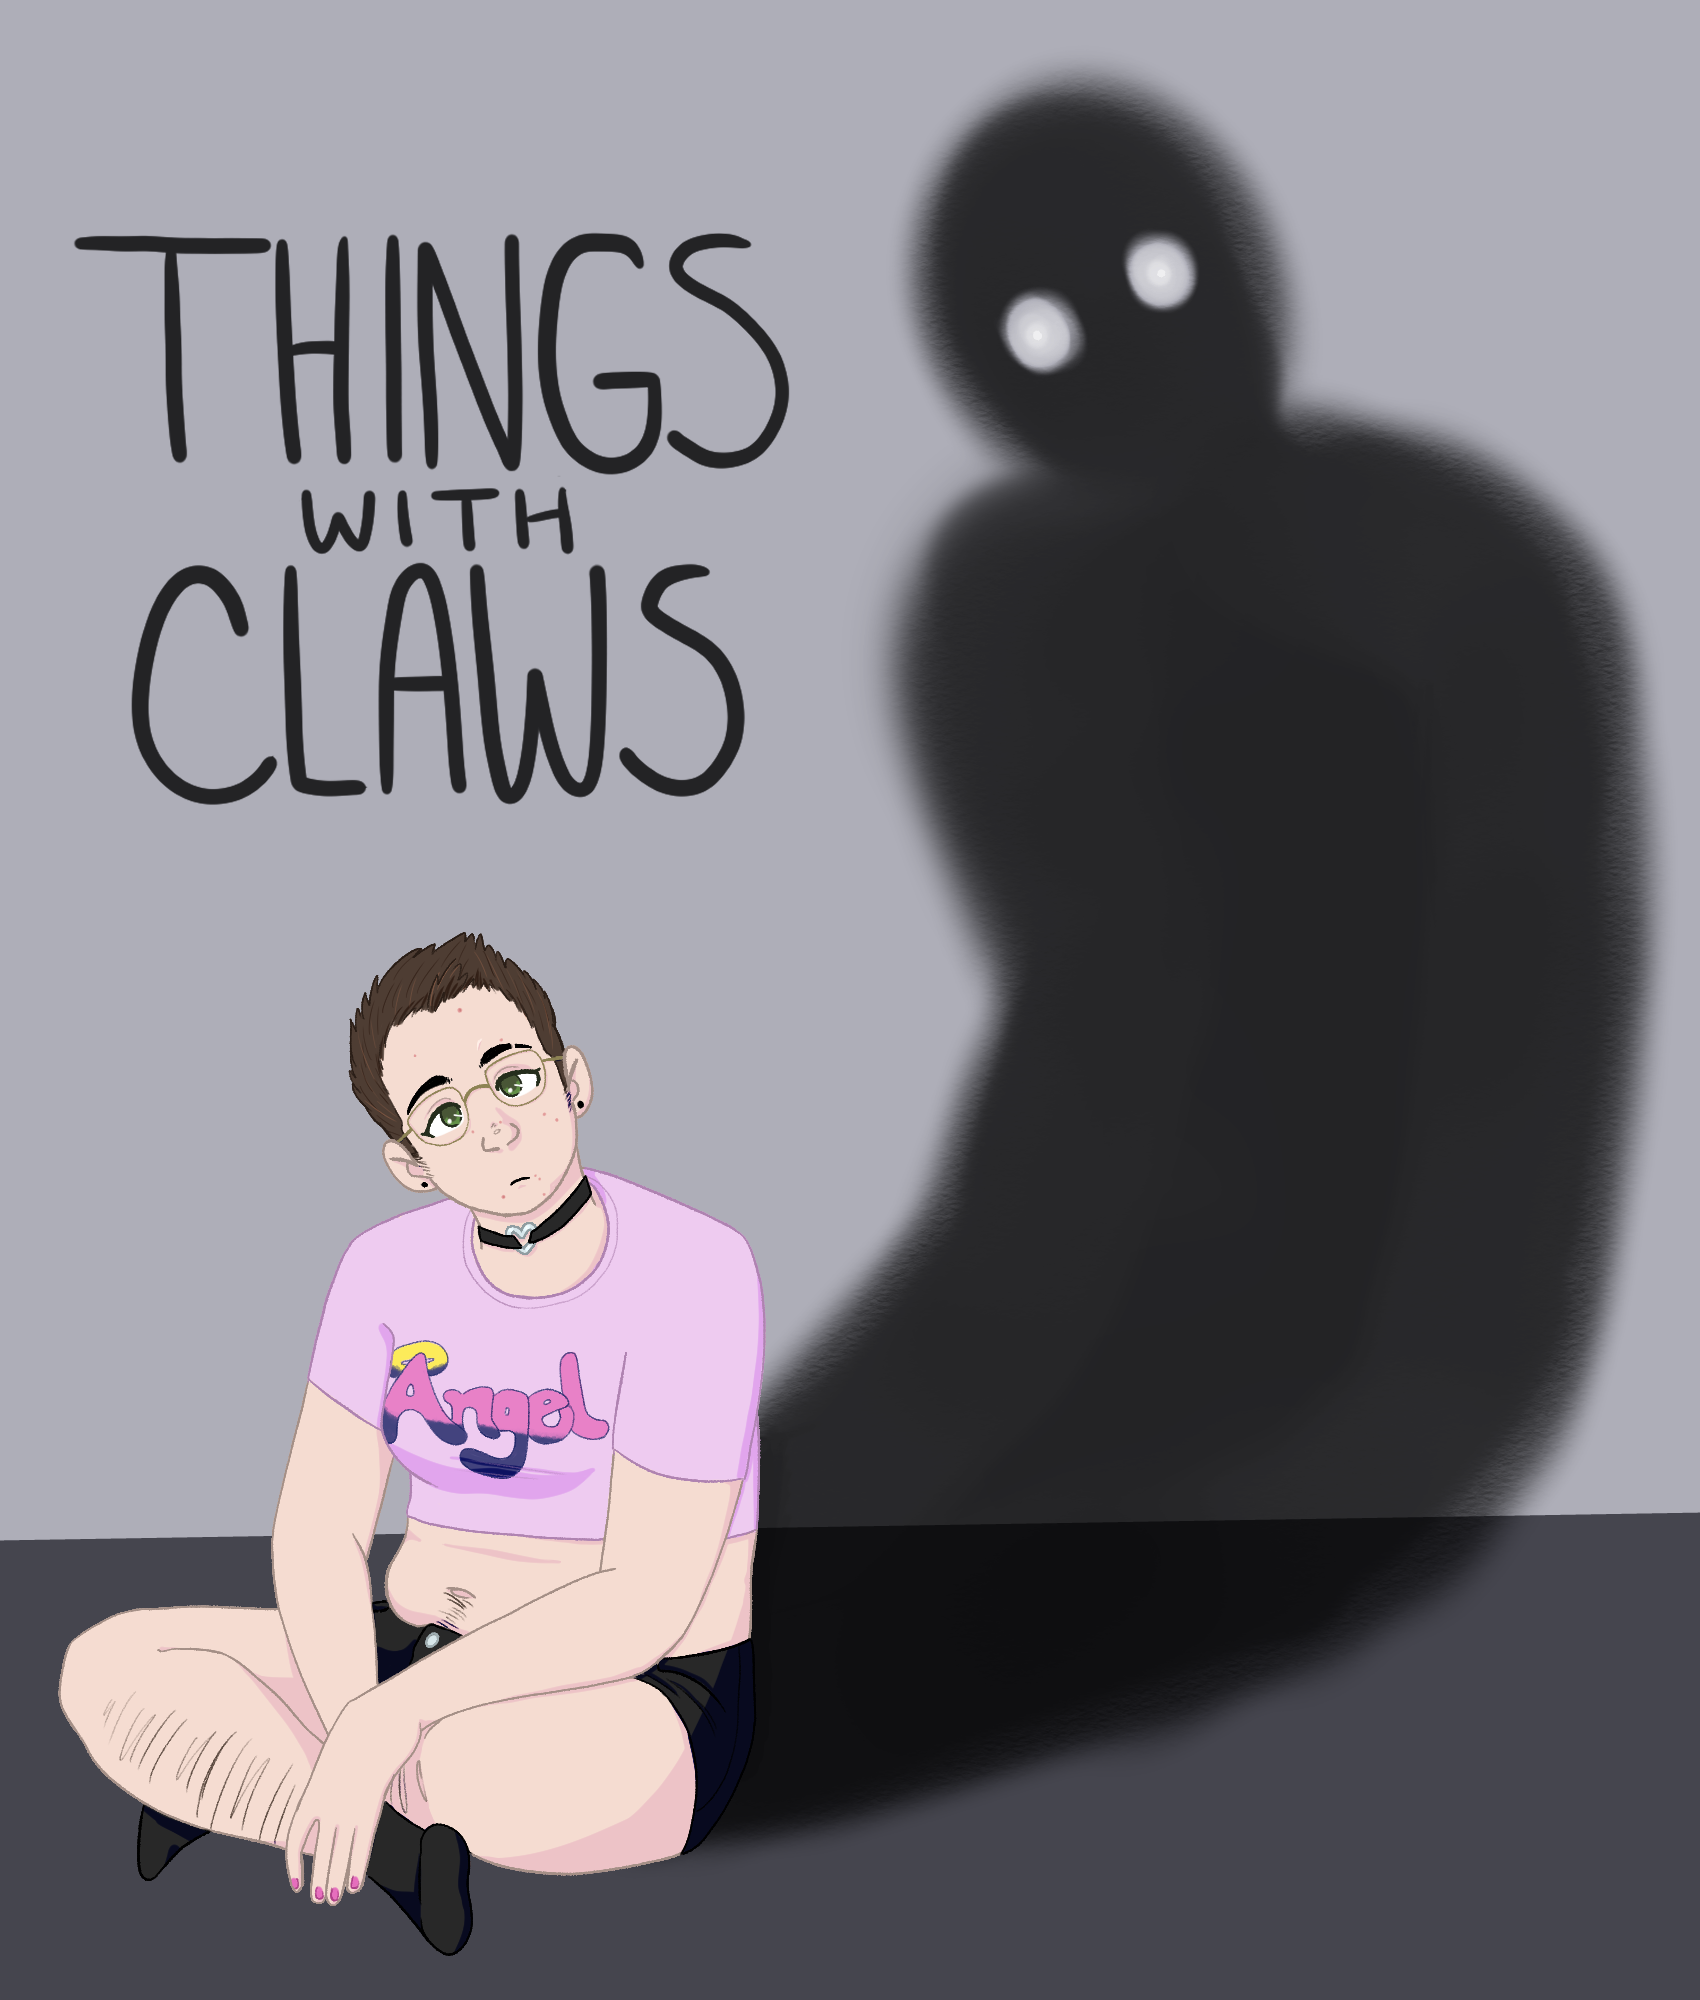 A self-portrait. A white-skinned person with short brown hair sits cross-legged against a wall, wearing glasses, a pink shirt, black shorts, and some accessories. Their shadow is thrown against the wall and seems to be supernatural with glowing white eyes.